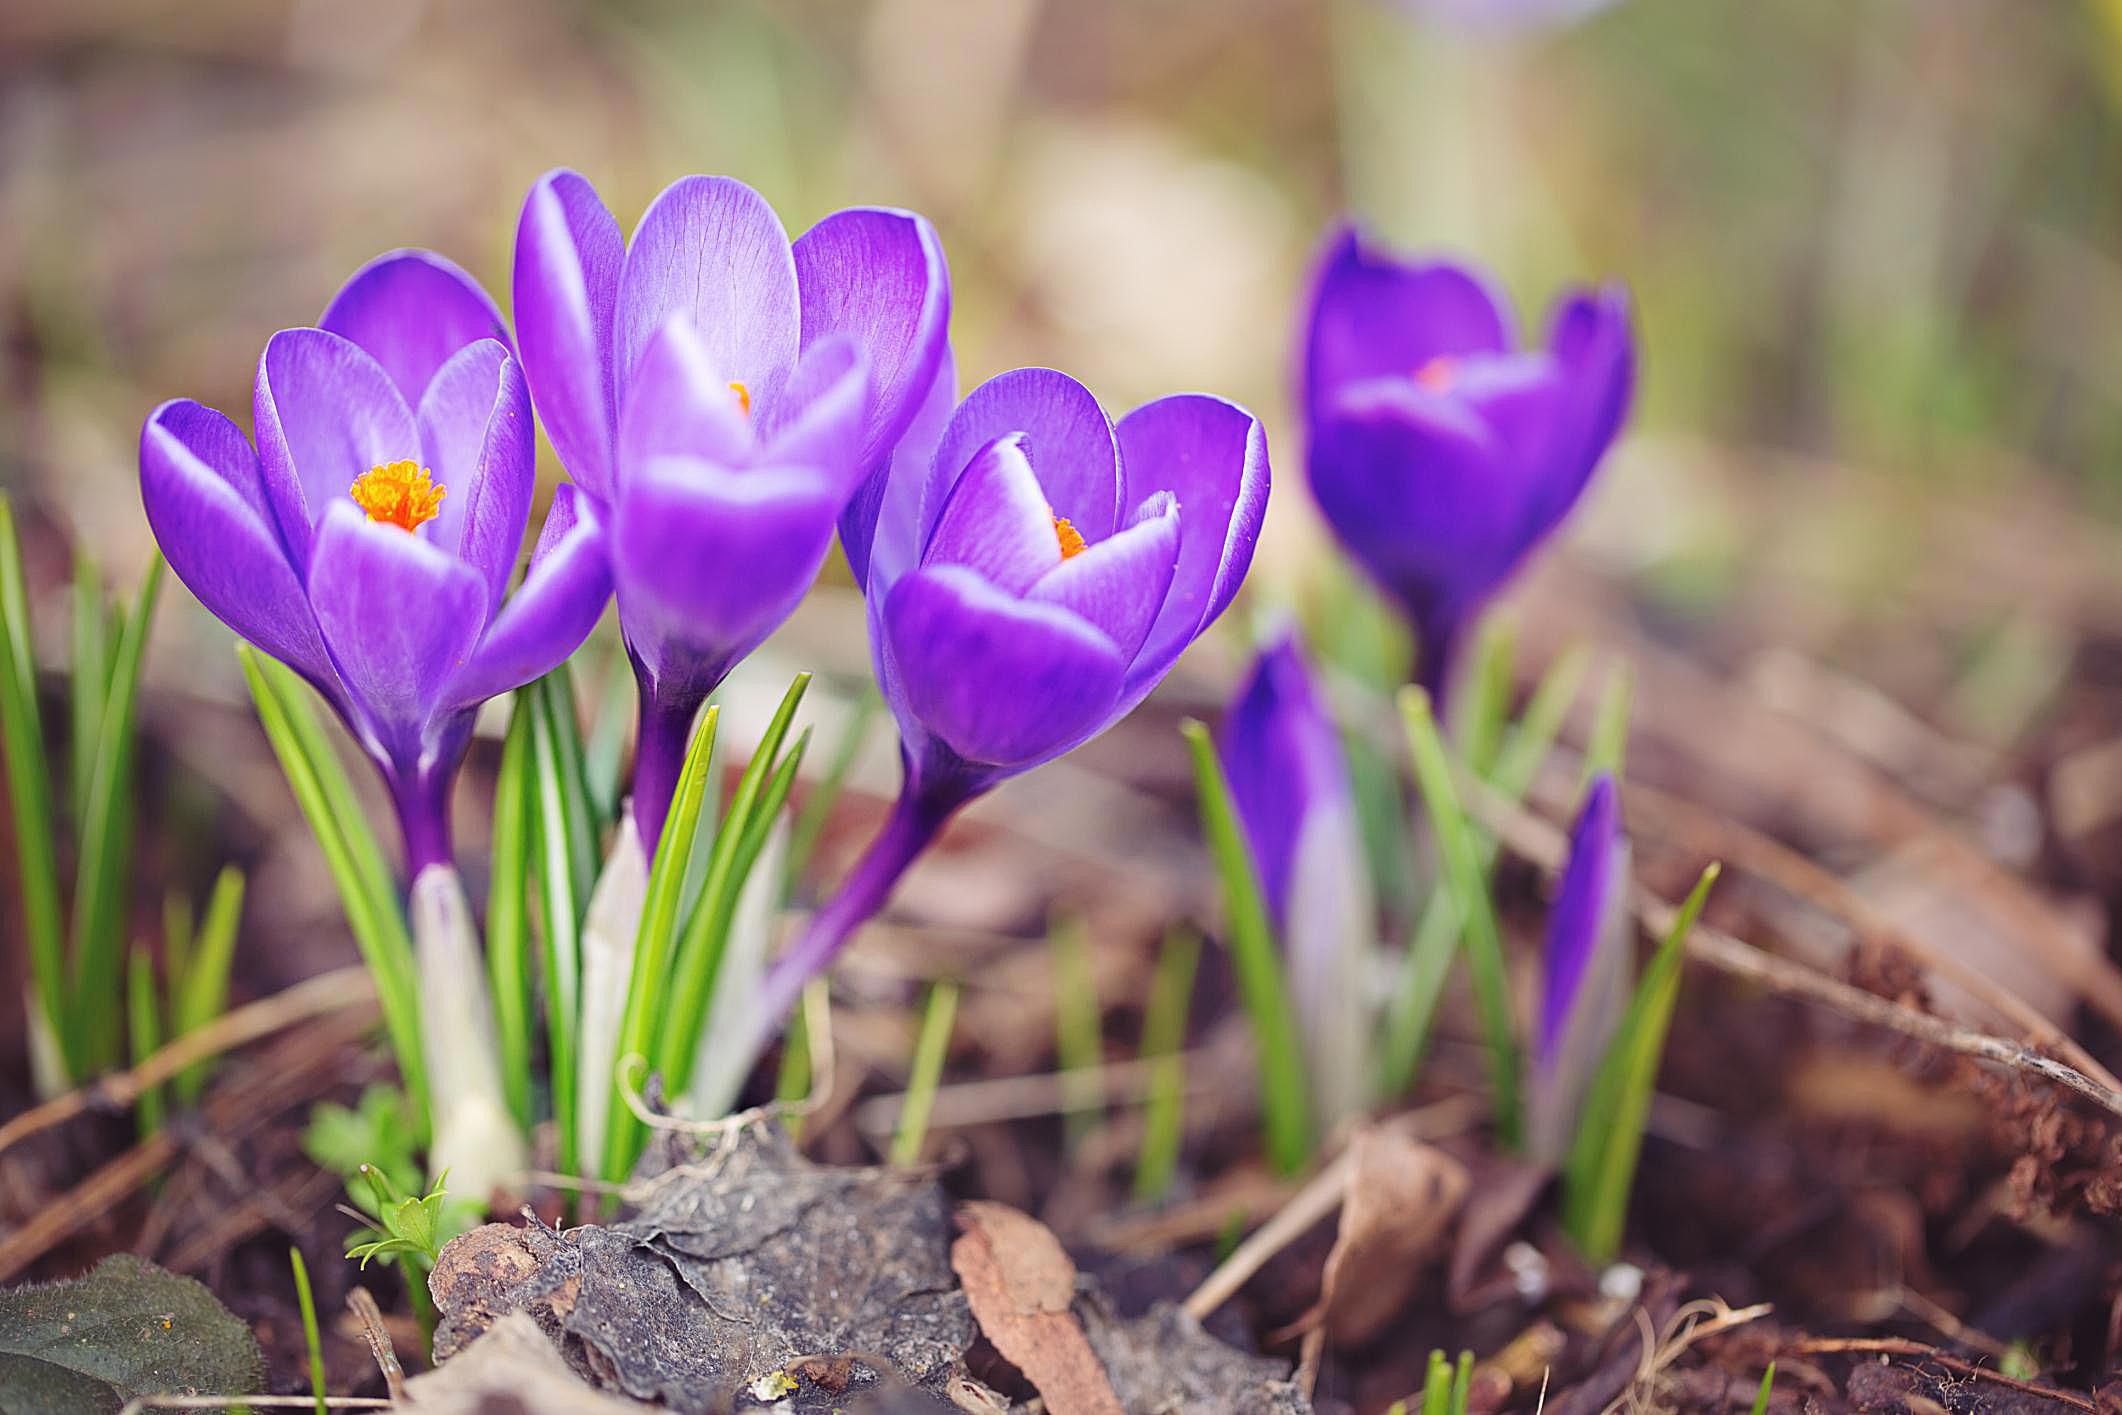 How to Grow and Maintain Spring-Blooming Crocus